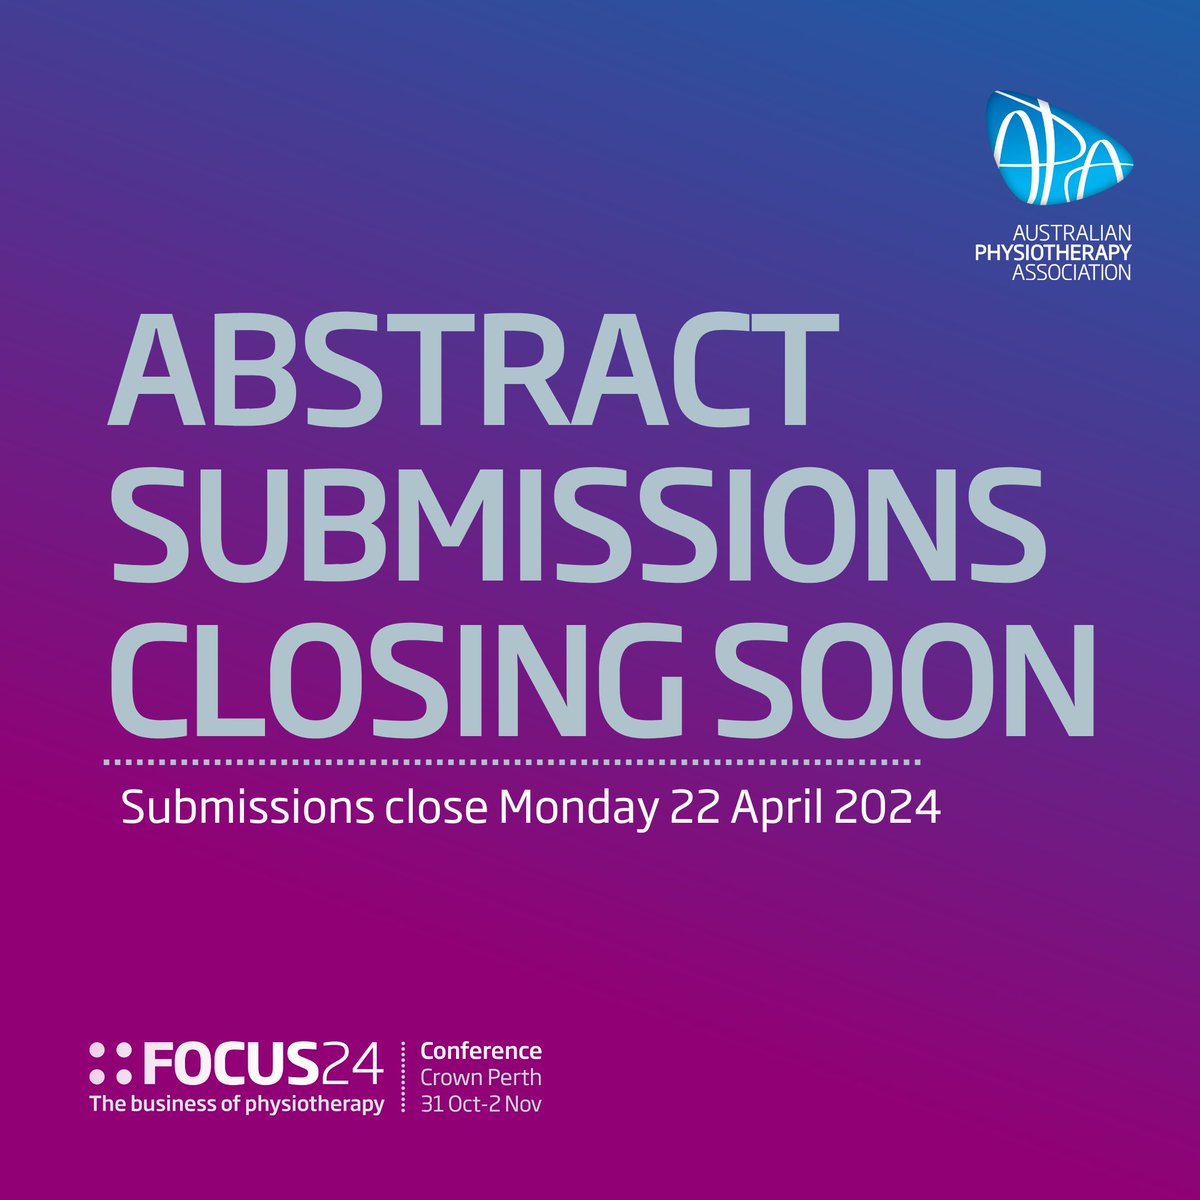 10 days to go until abstract submissions close for FOCUS24! We’re looking for high-quality submissions that fit into the themes of practice, business, management and leadership, and education. For more information, visit physiotherapy.eventsair.com/focus24/abstra… @BizEventsPerth @CrownResorts